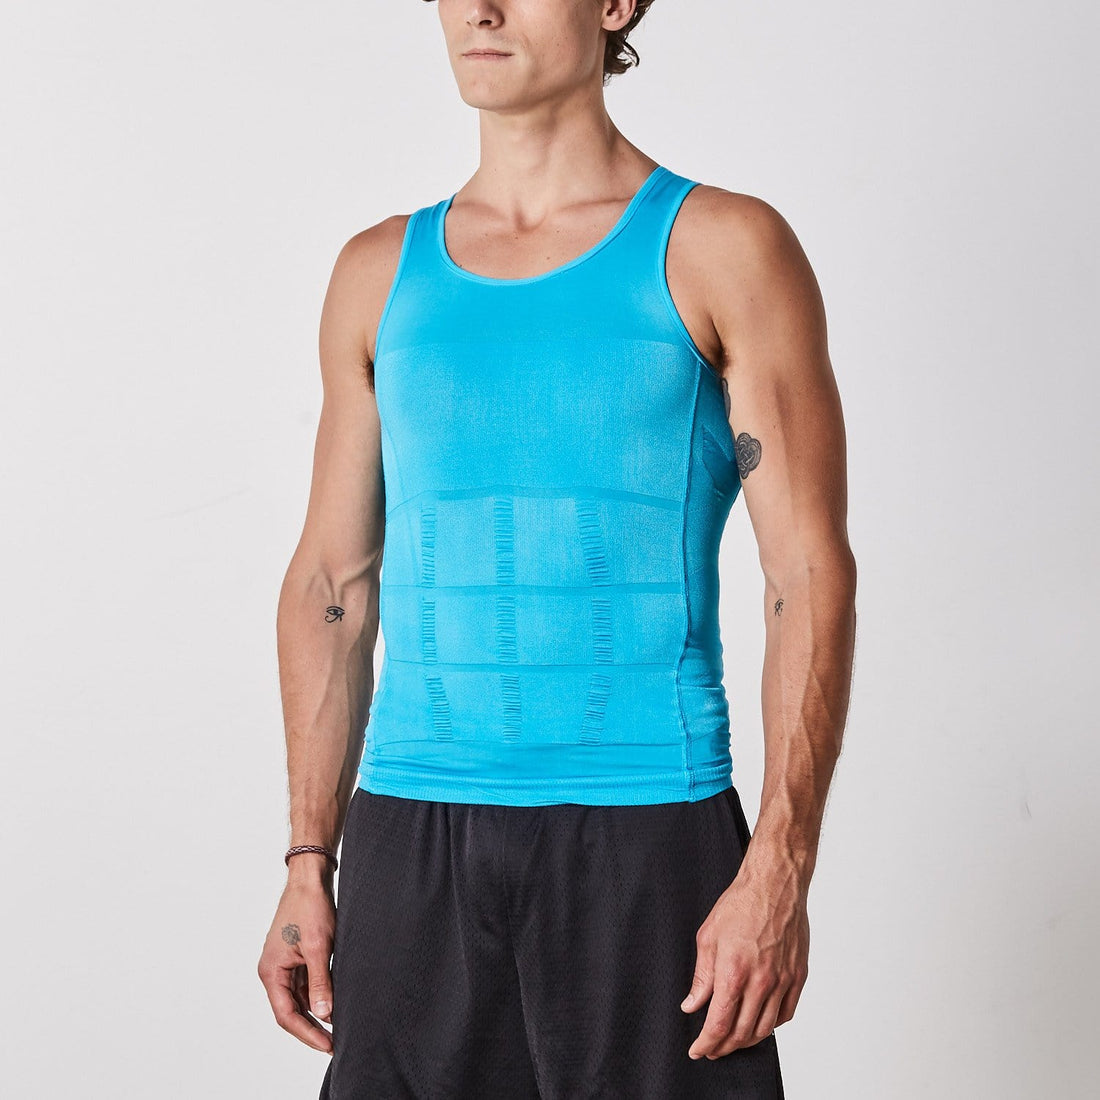 Men's Graduated Tank Top – Extreme Fit